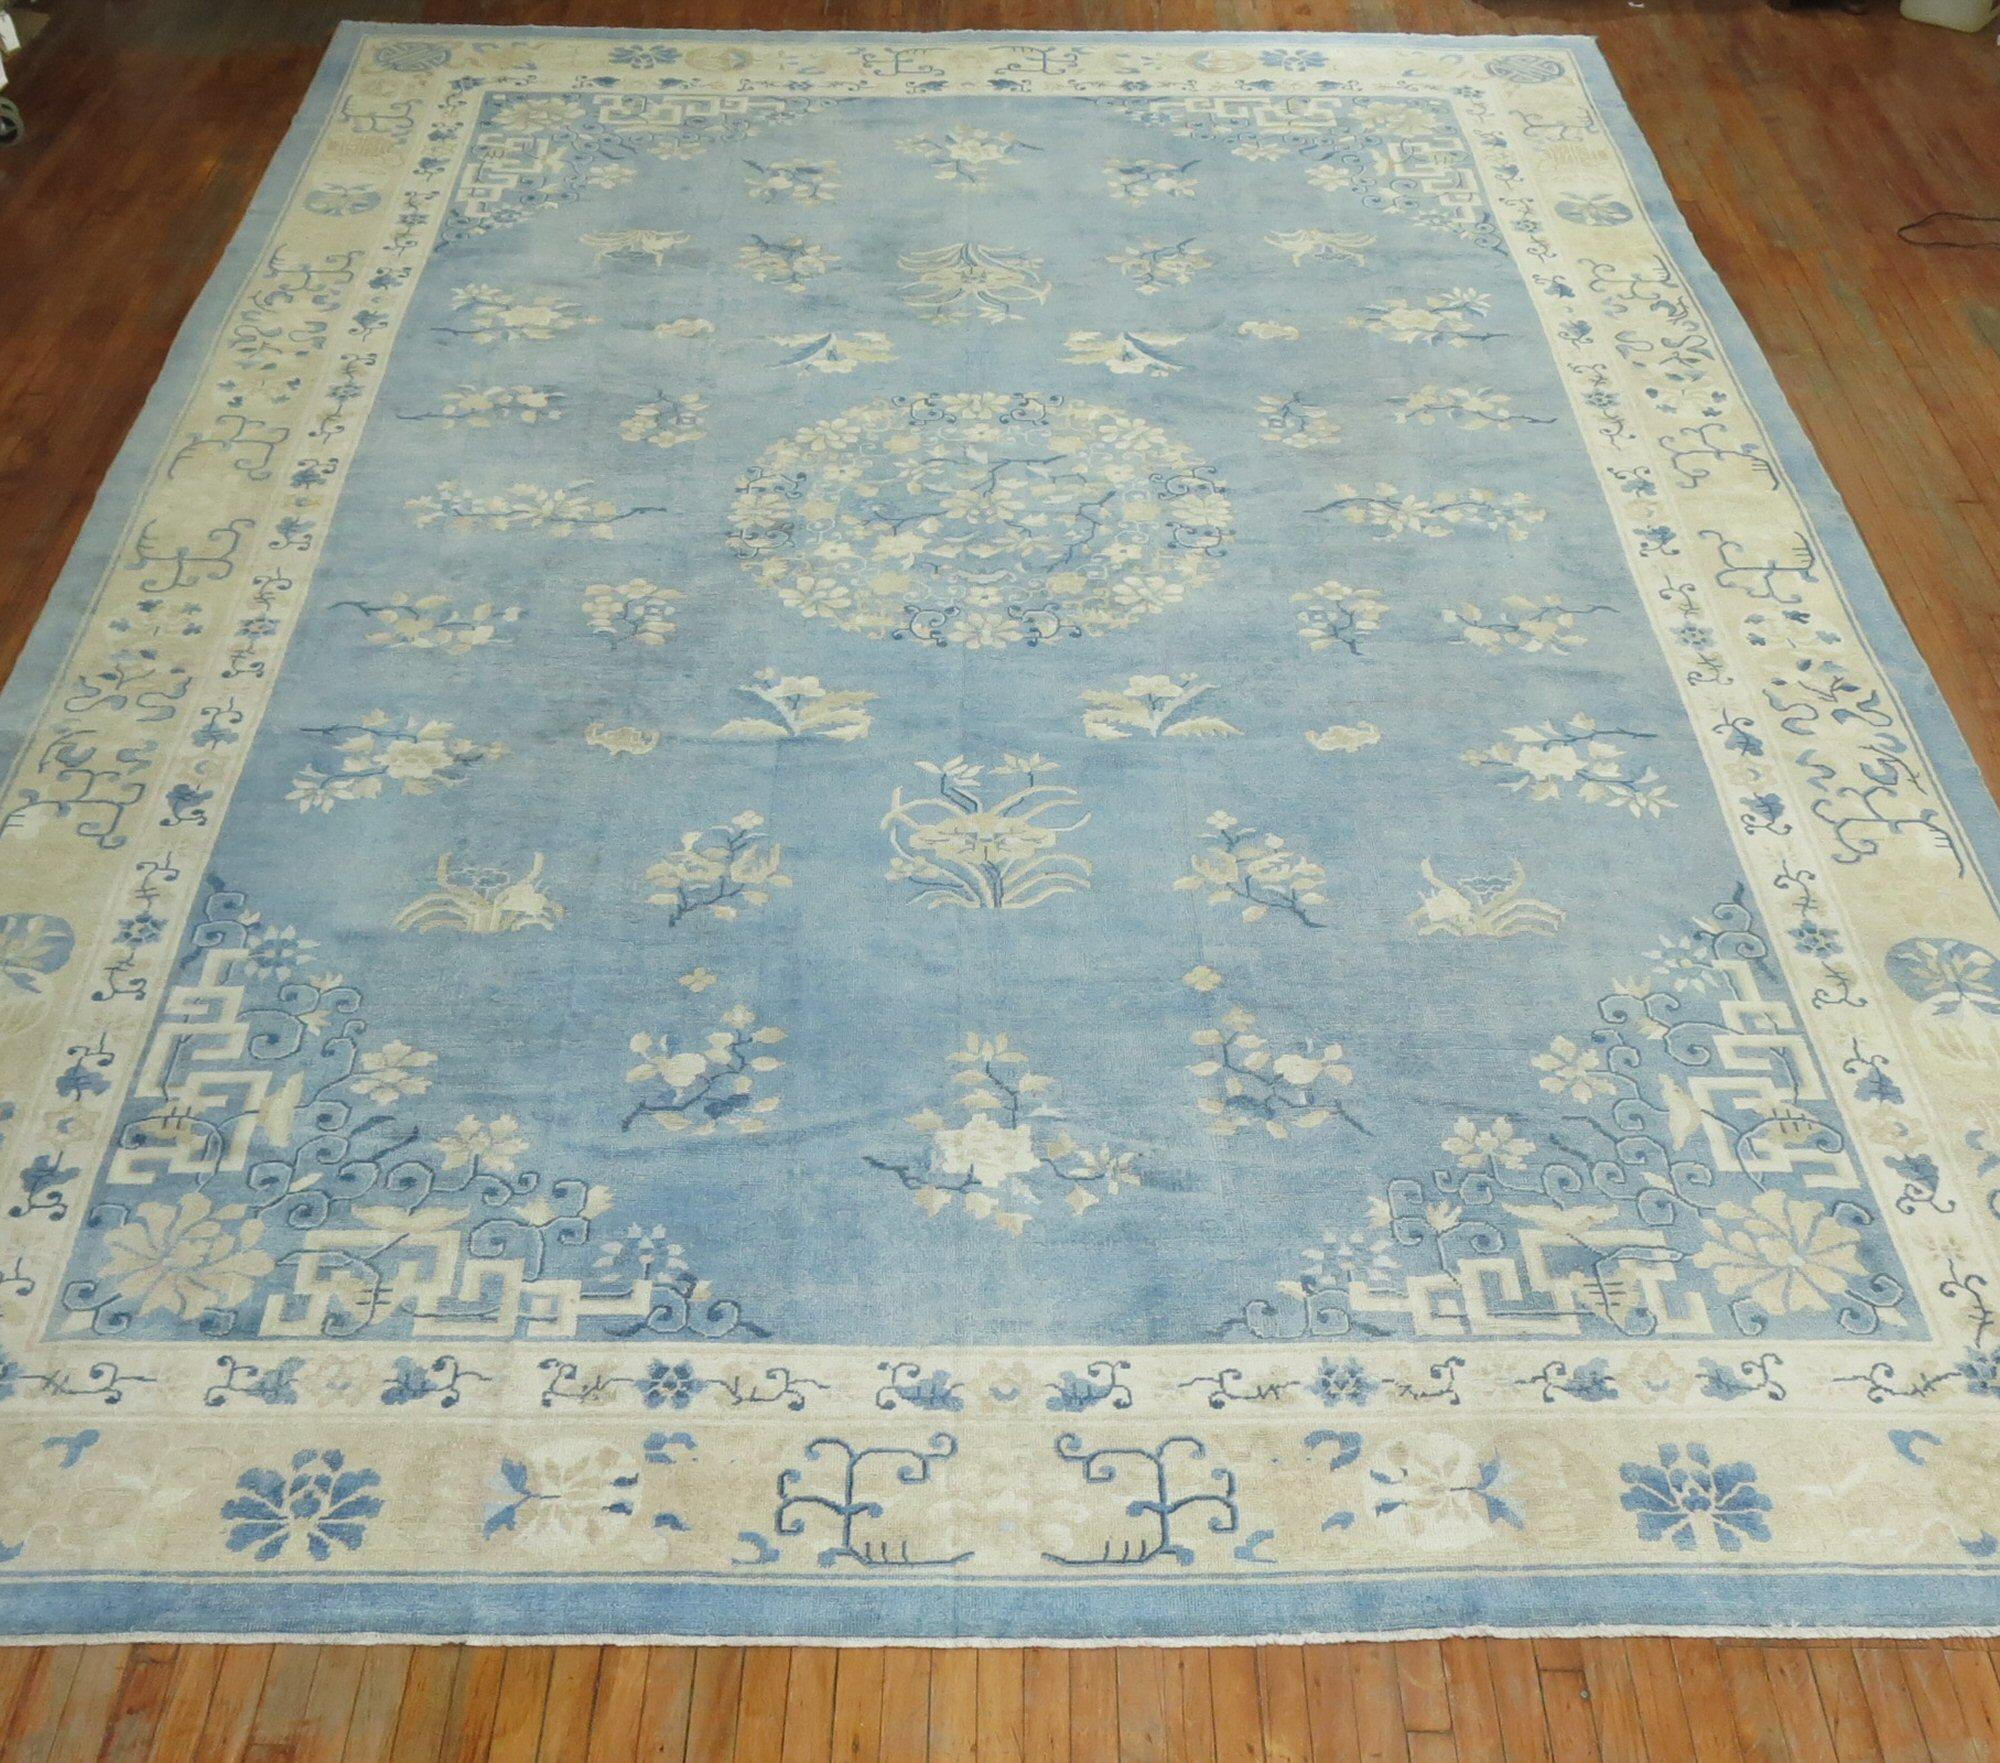 An early 20th century oversize one of a kind Chinese rug in various predominant light blues and creams. The wool and feel of the rug is very soft on the feet. It has a silky sheen to it as well. Wool on cotton foundation.

Measures: 12' x 17'10''.